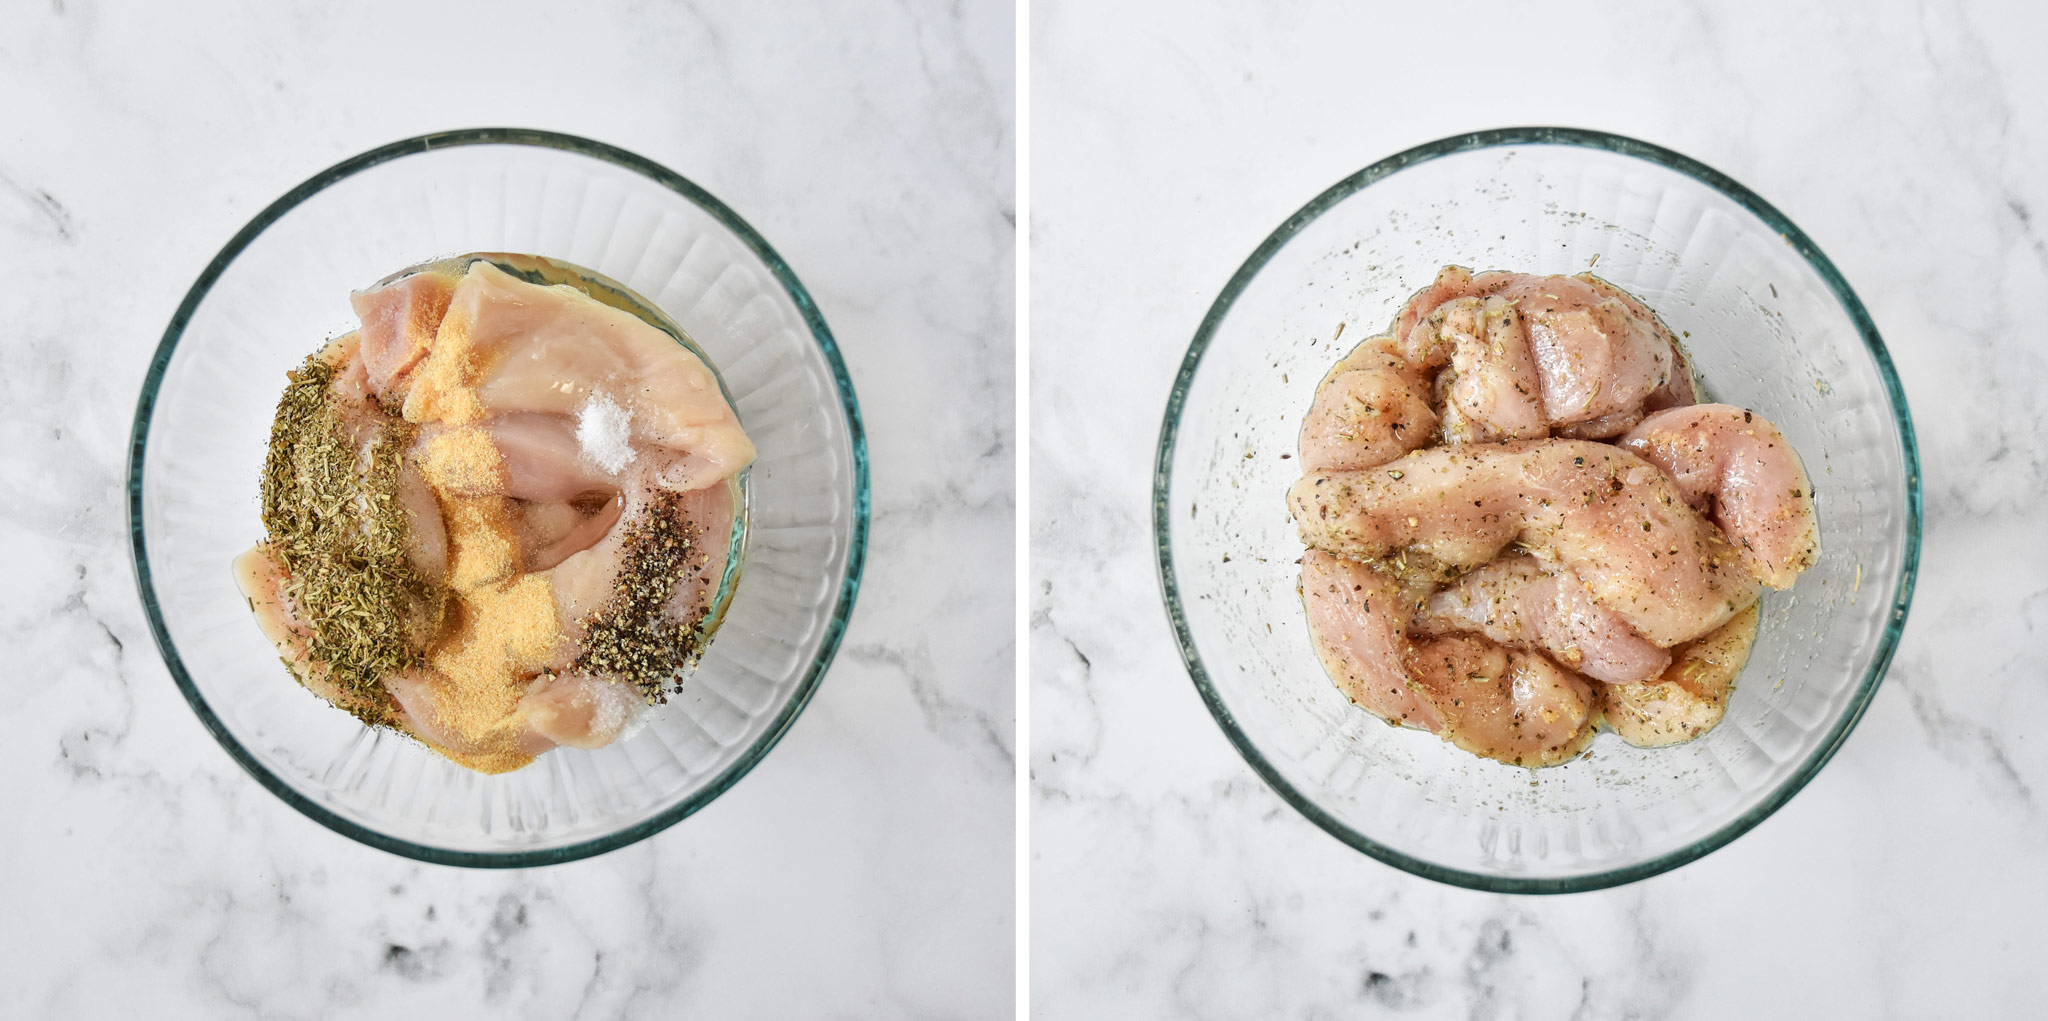 before and after mixing the ingredients to marinate the air fryer chicken tenders.